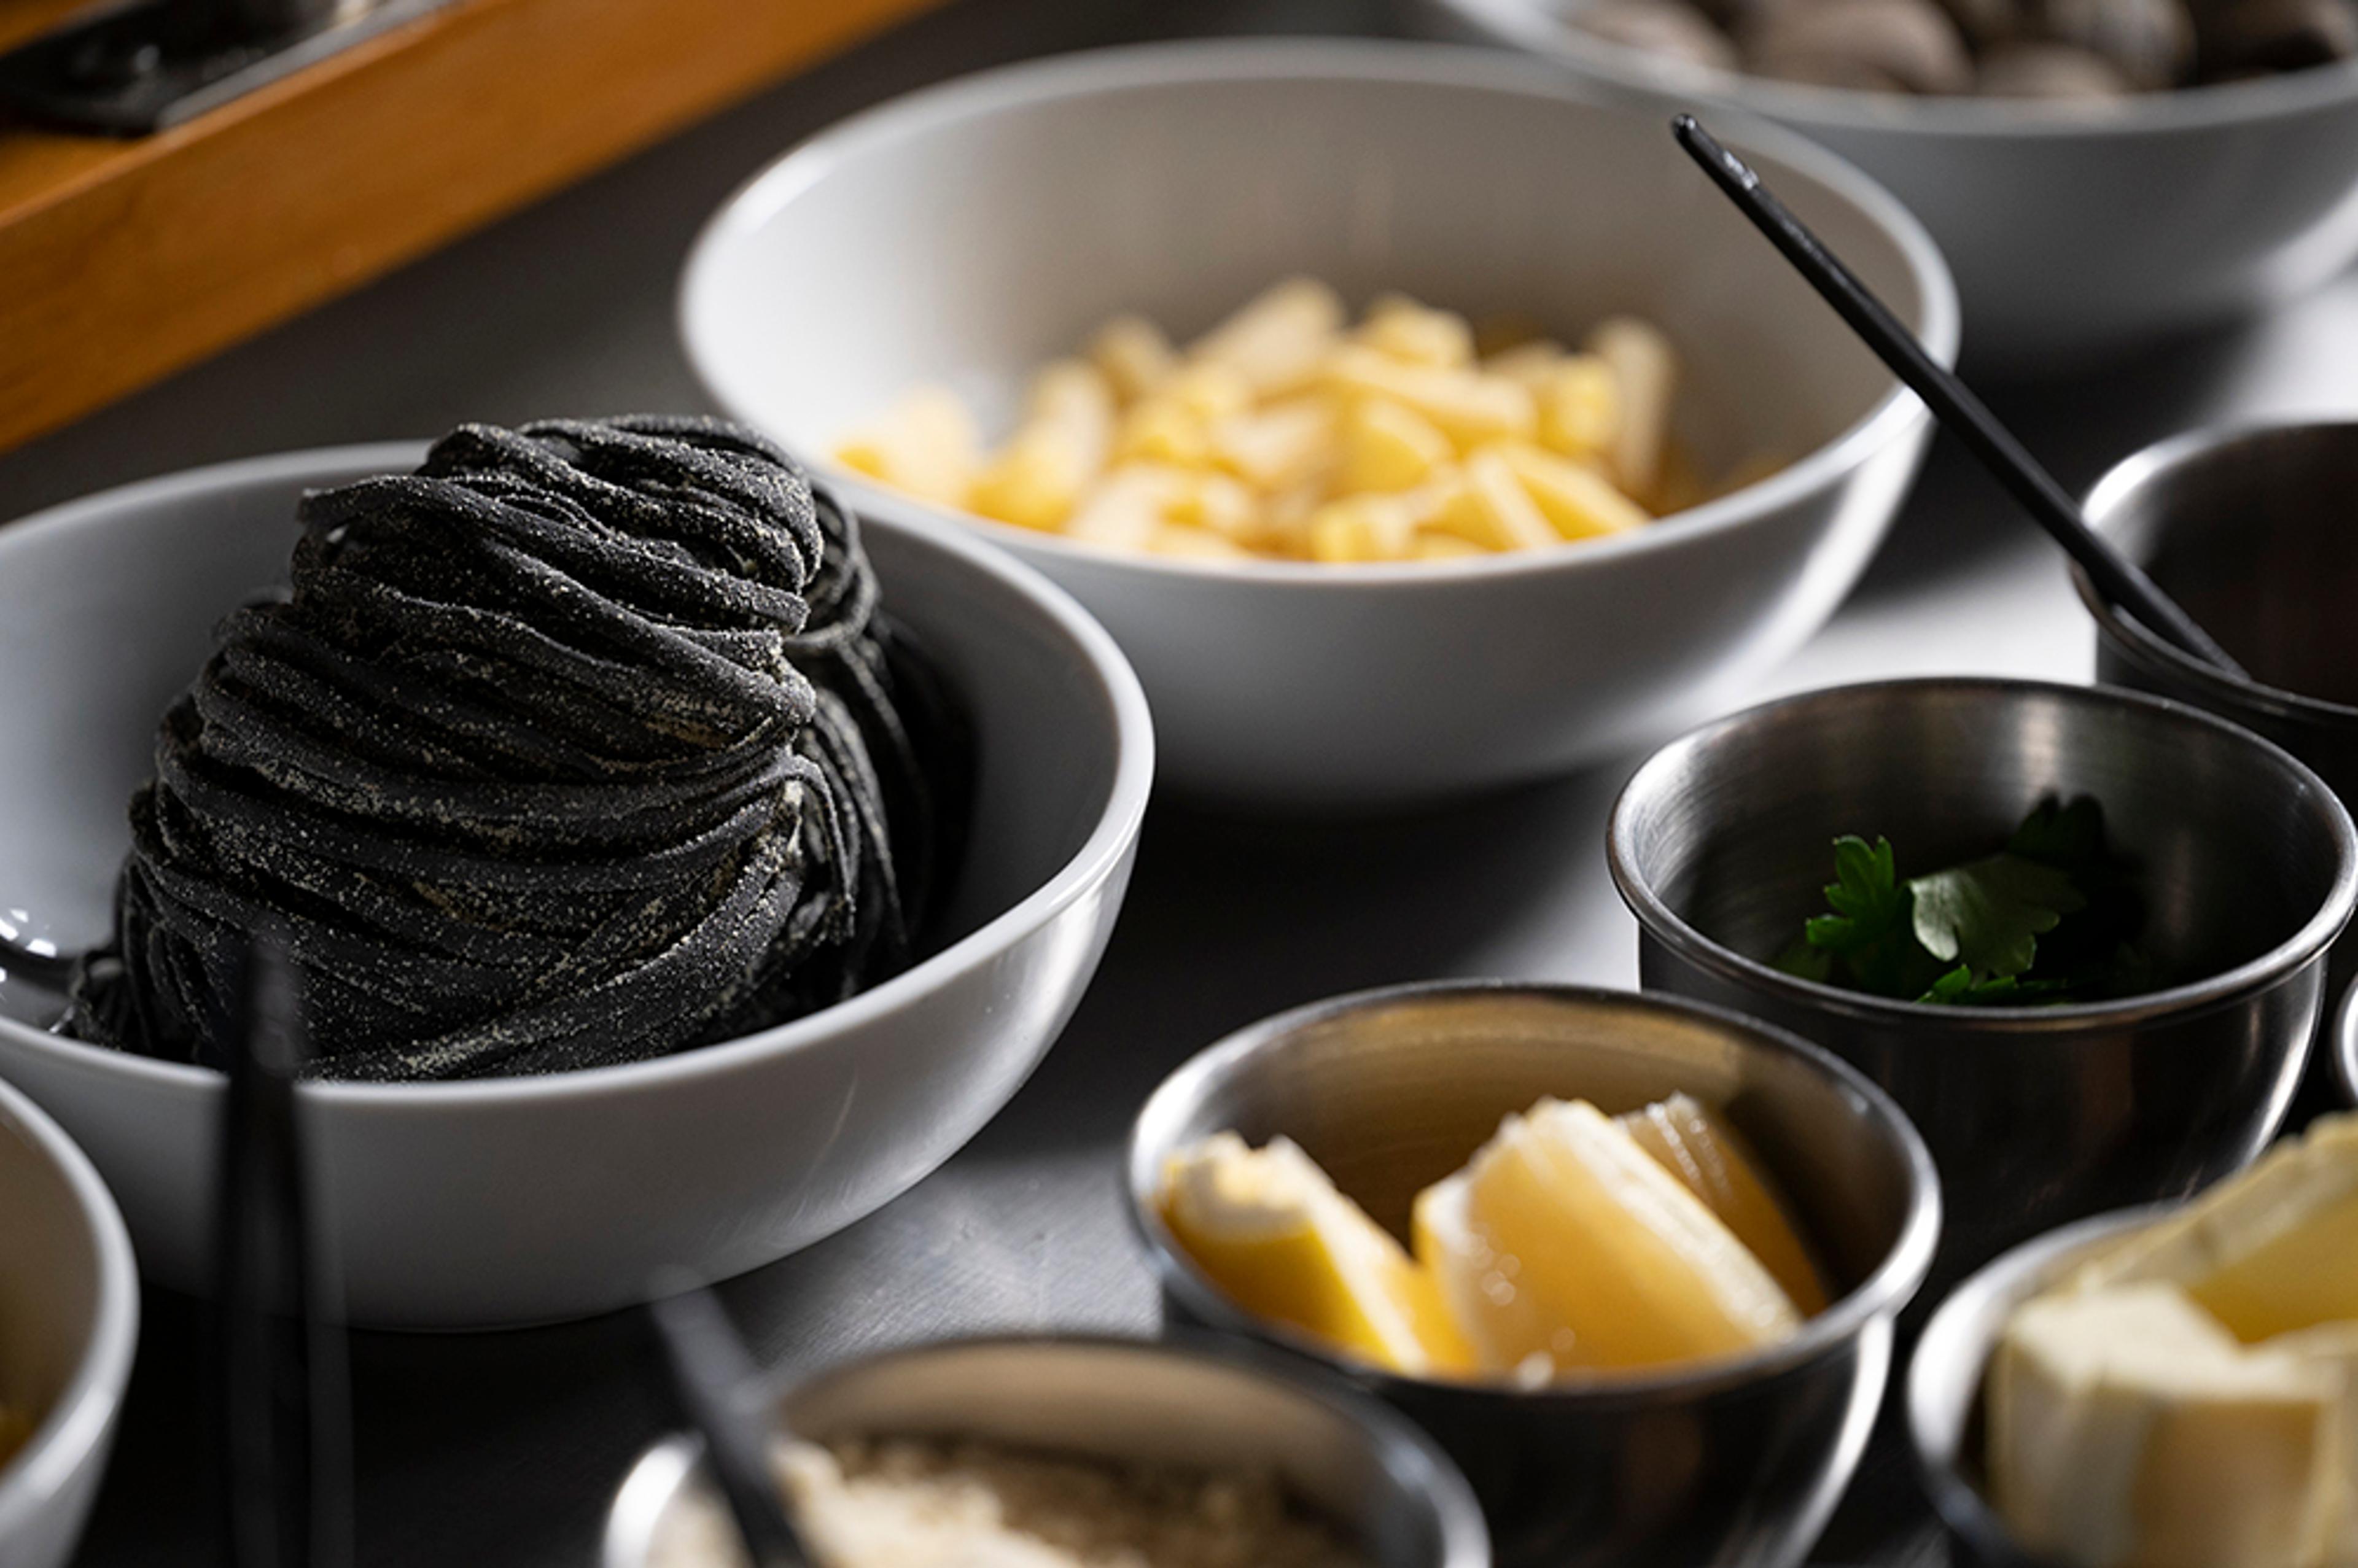 Fresh ingredients including squid ink pasta, butter, parsley, house-made pasta